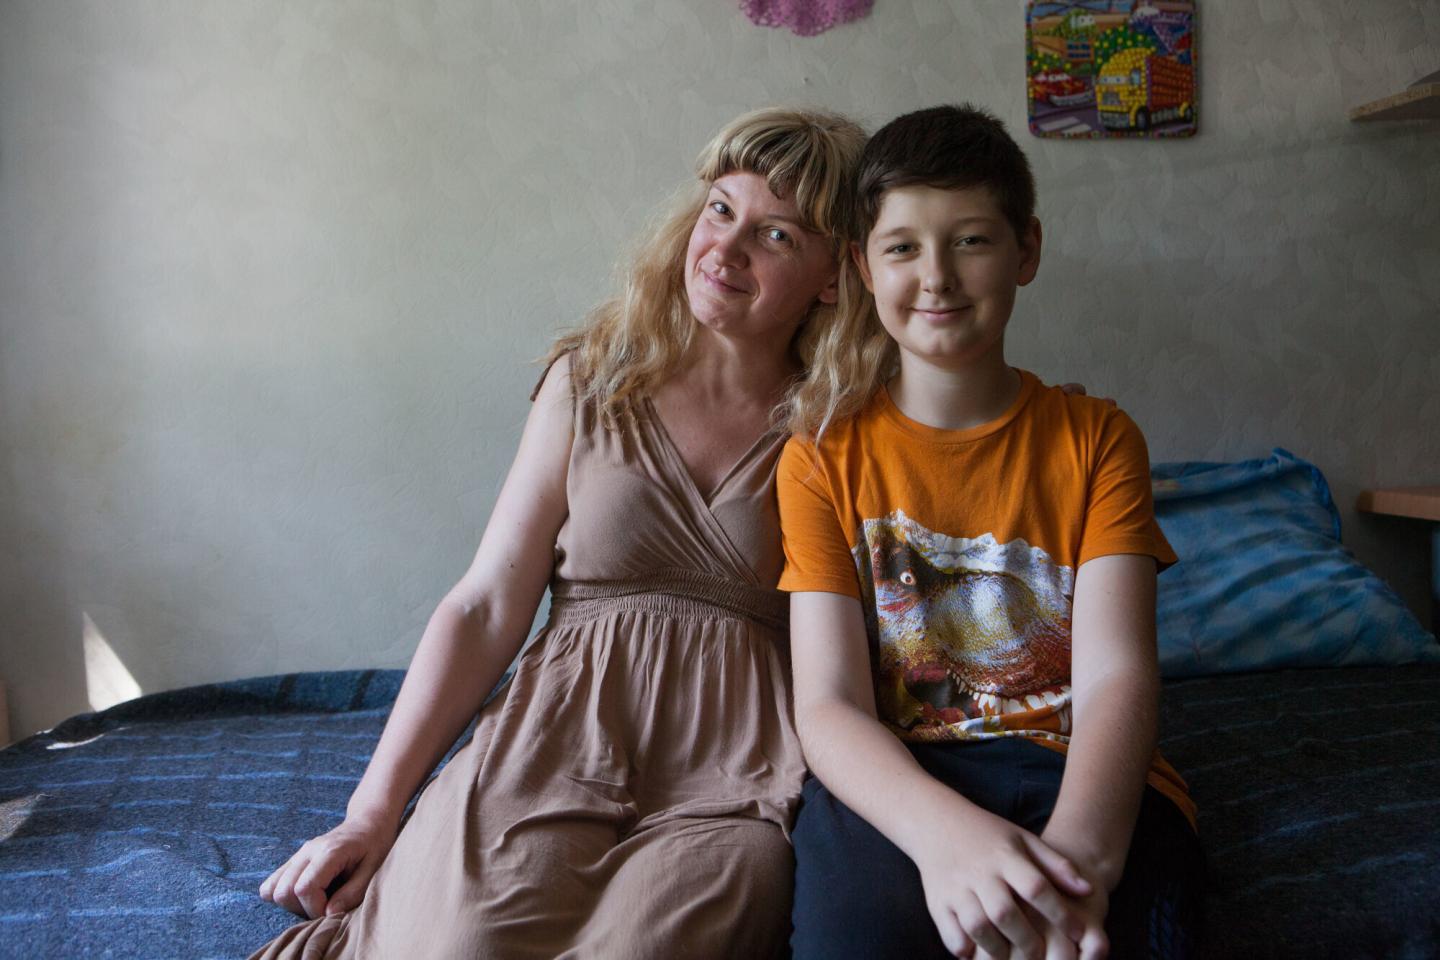 A Ukrainian mother and son sit together on a bed and smile for the camera